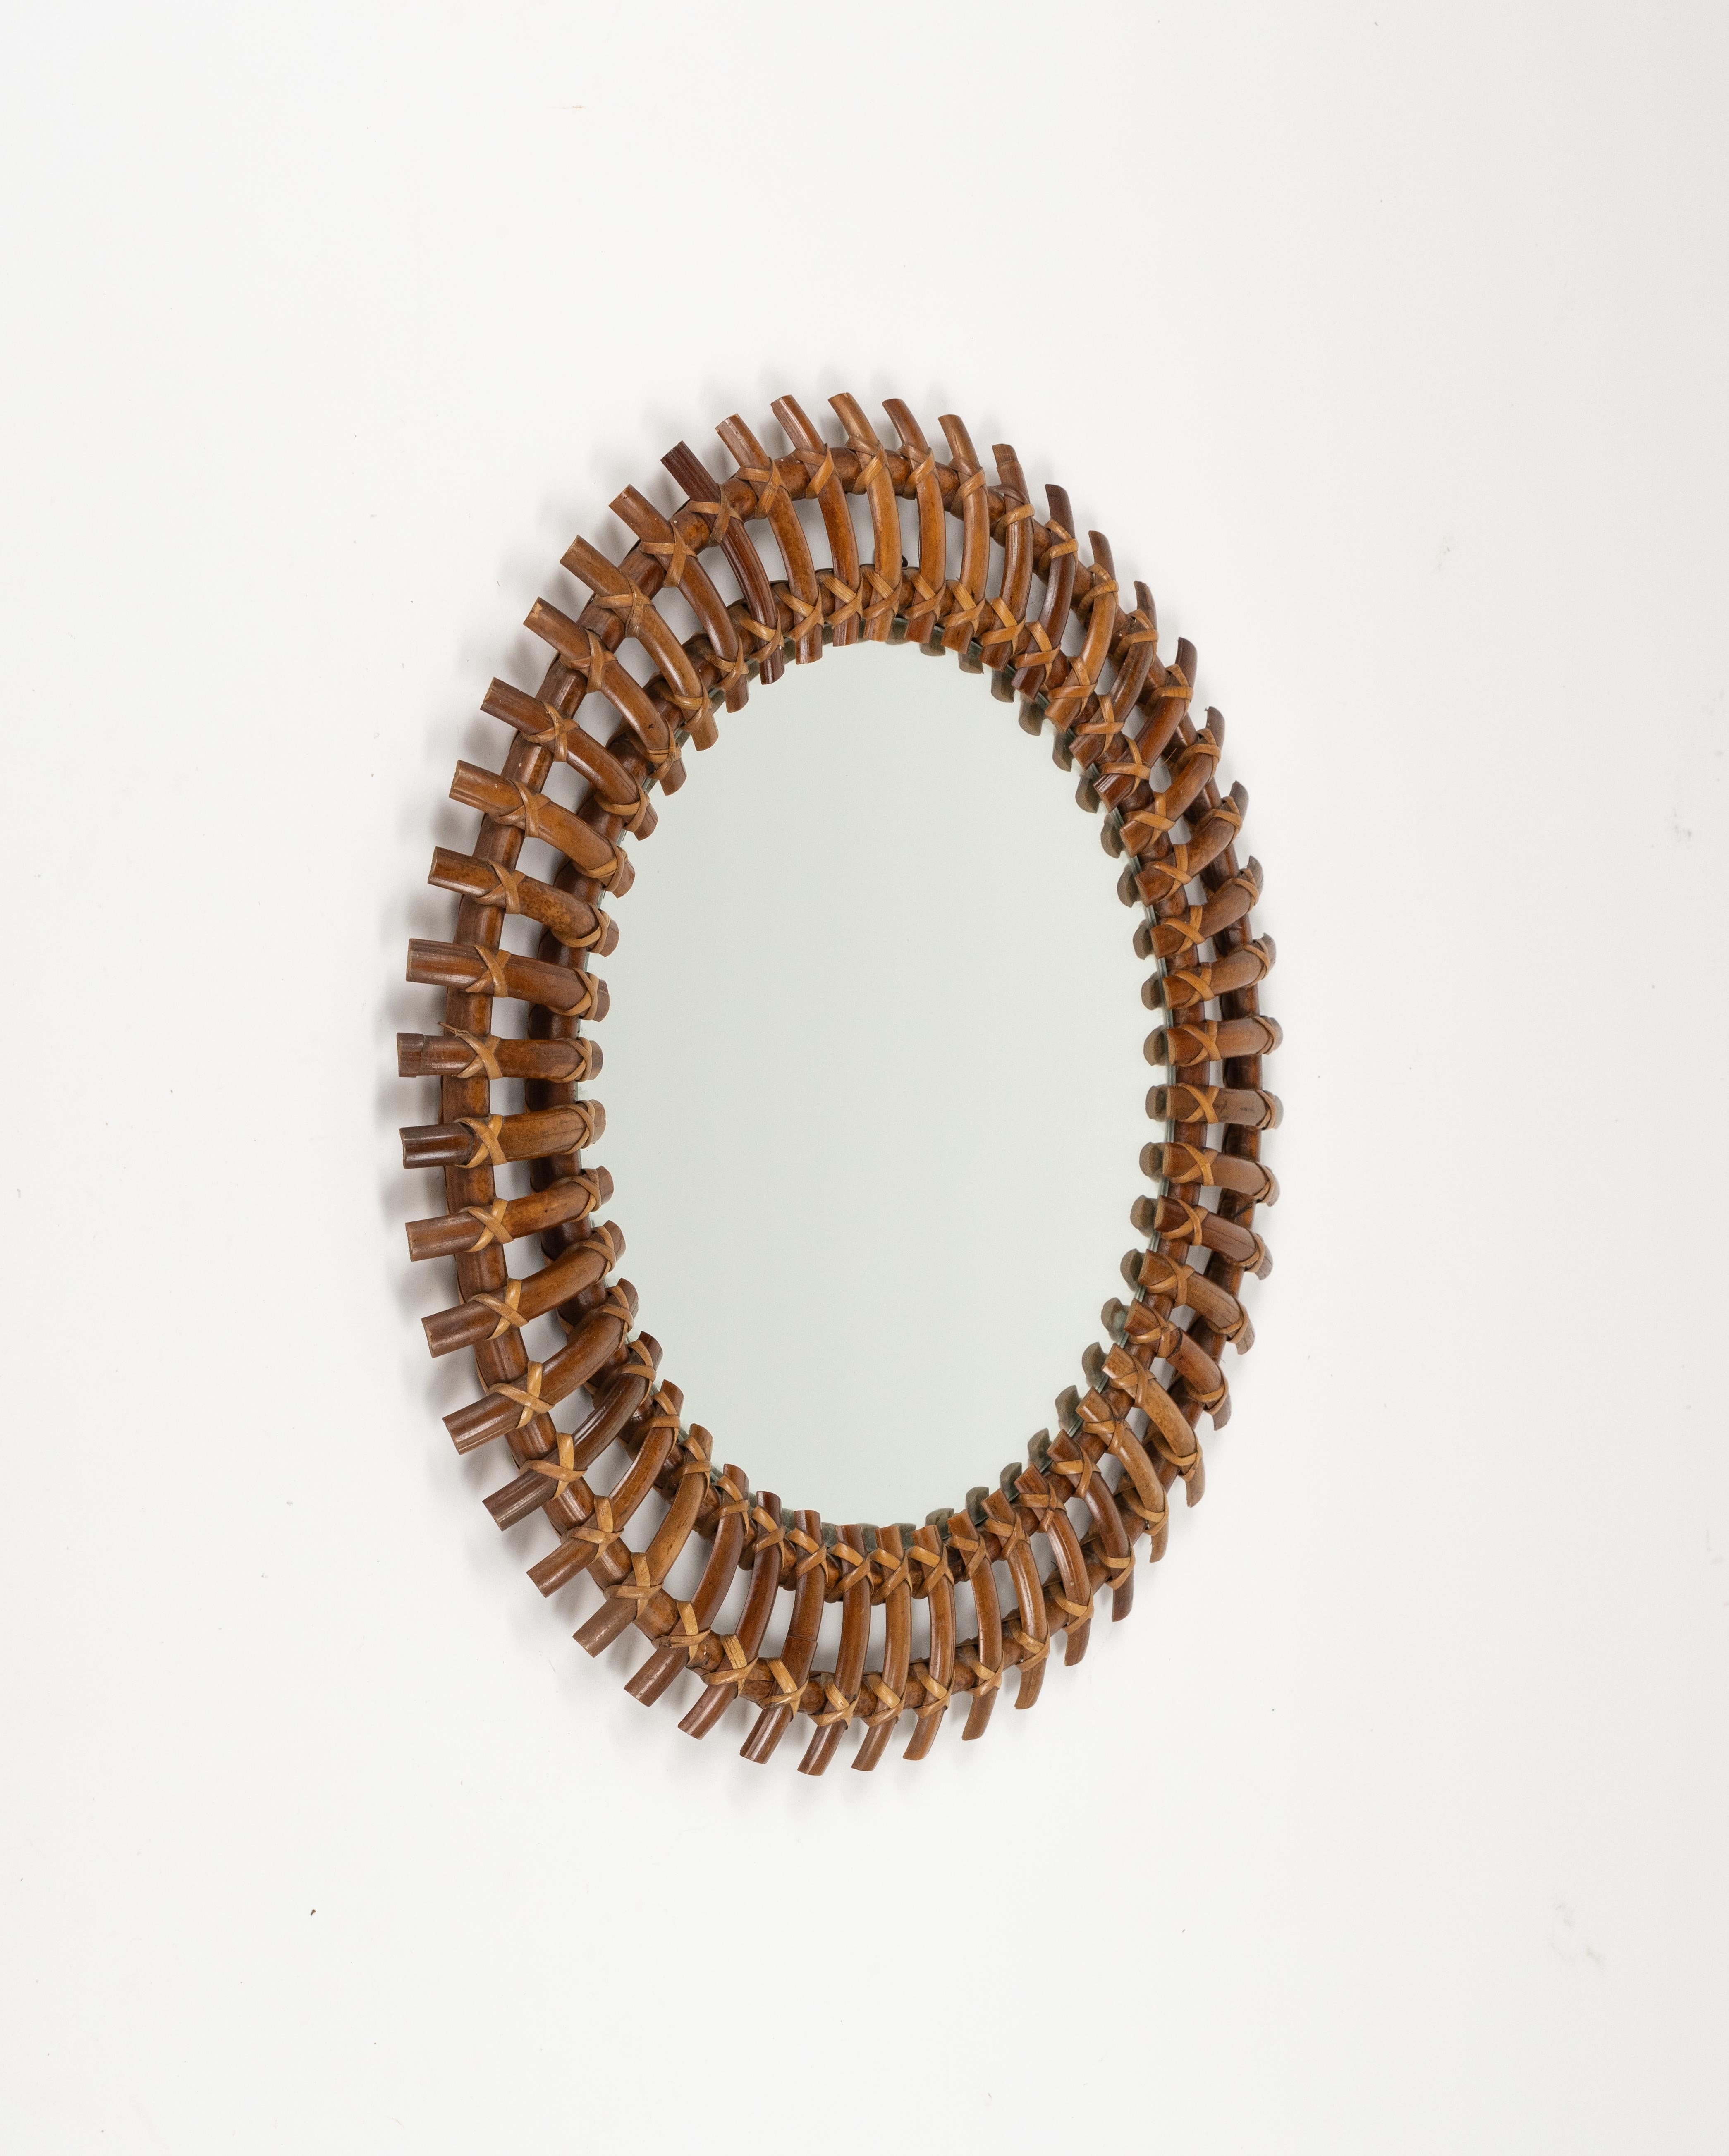 Midcentury beautiful sunburst round wall mirror in bamboo and rattan.   

Made in Italy in the 1960s.